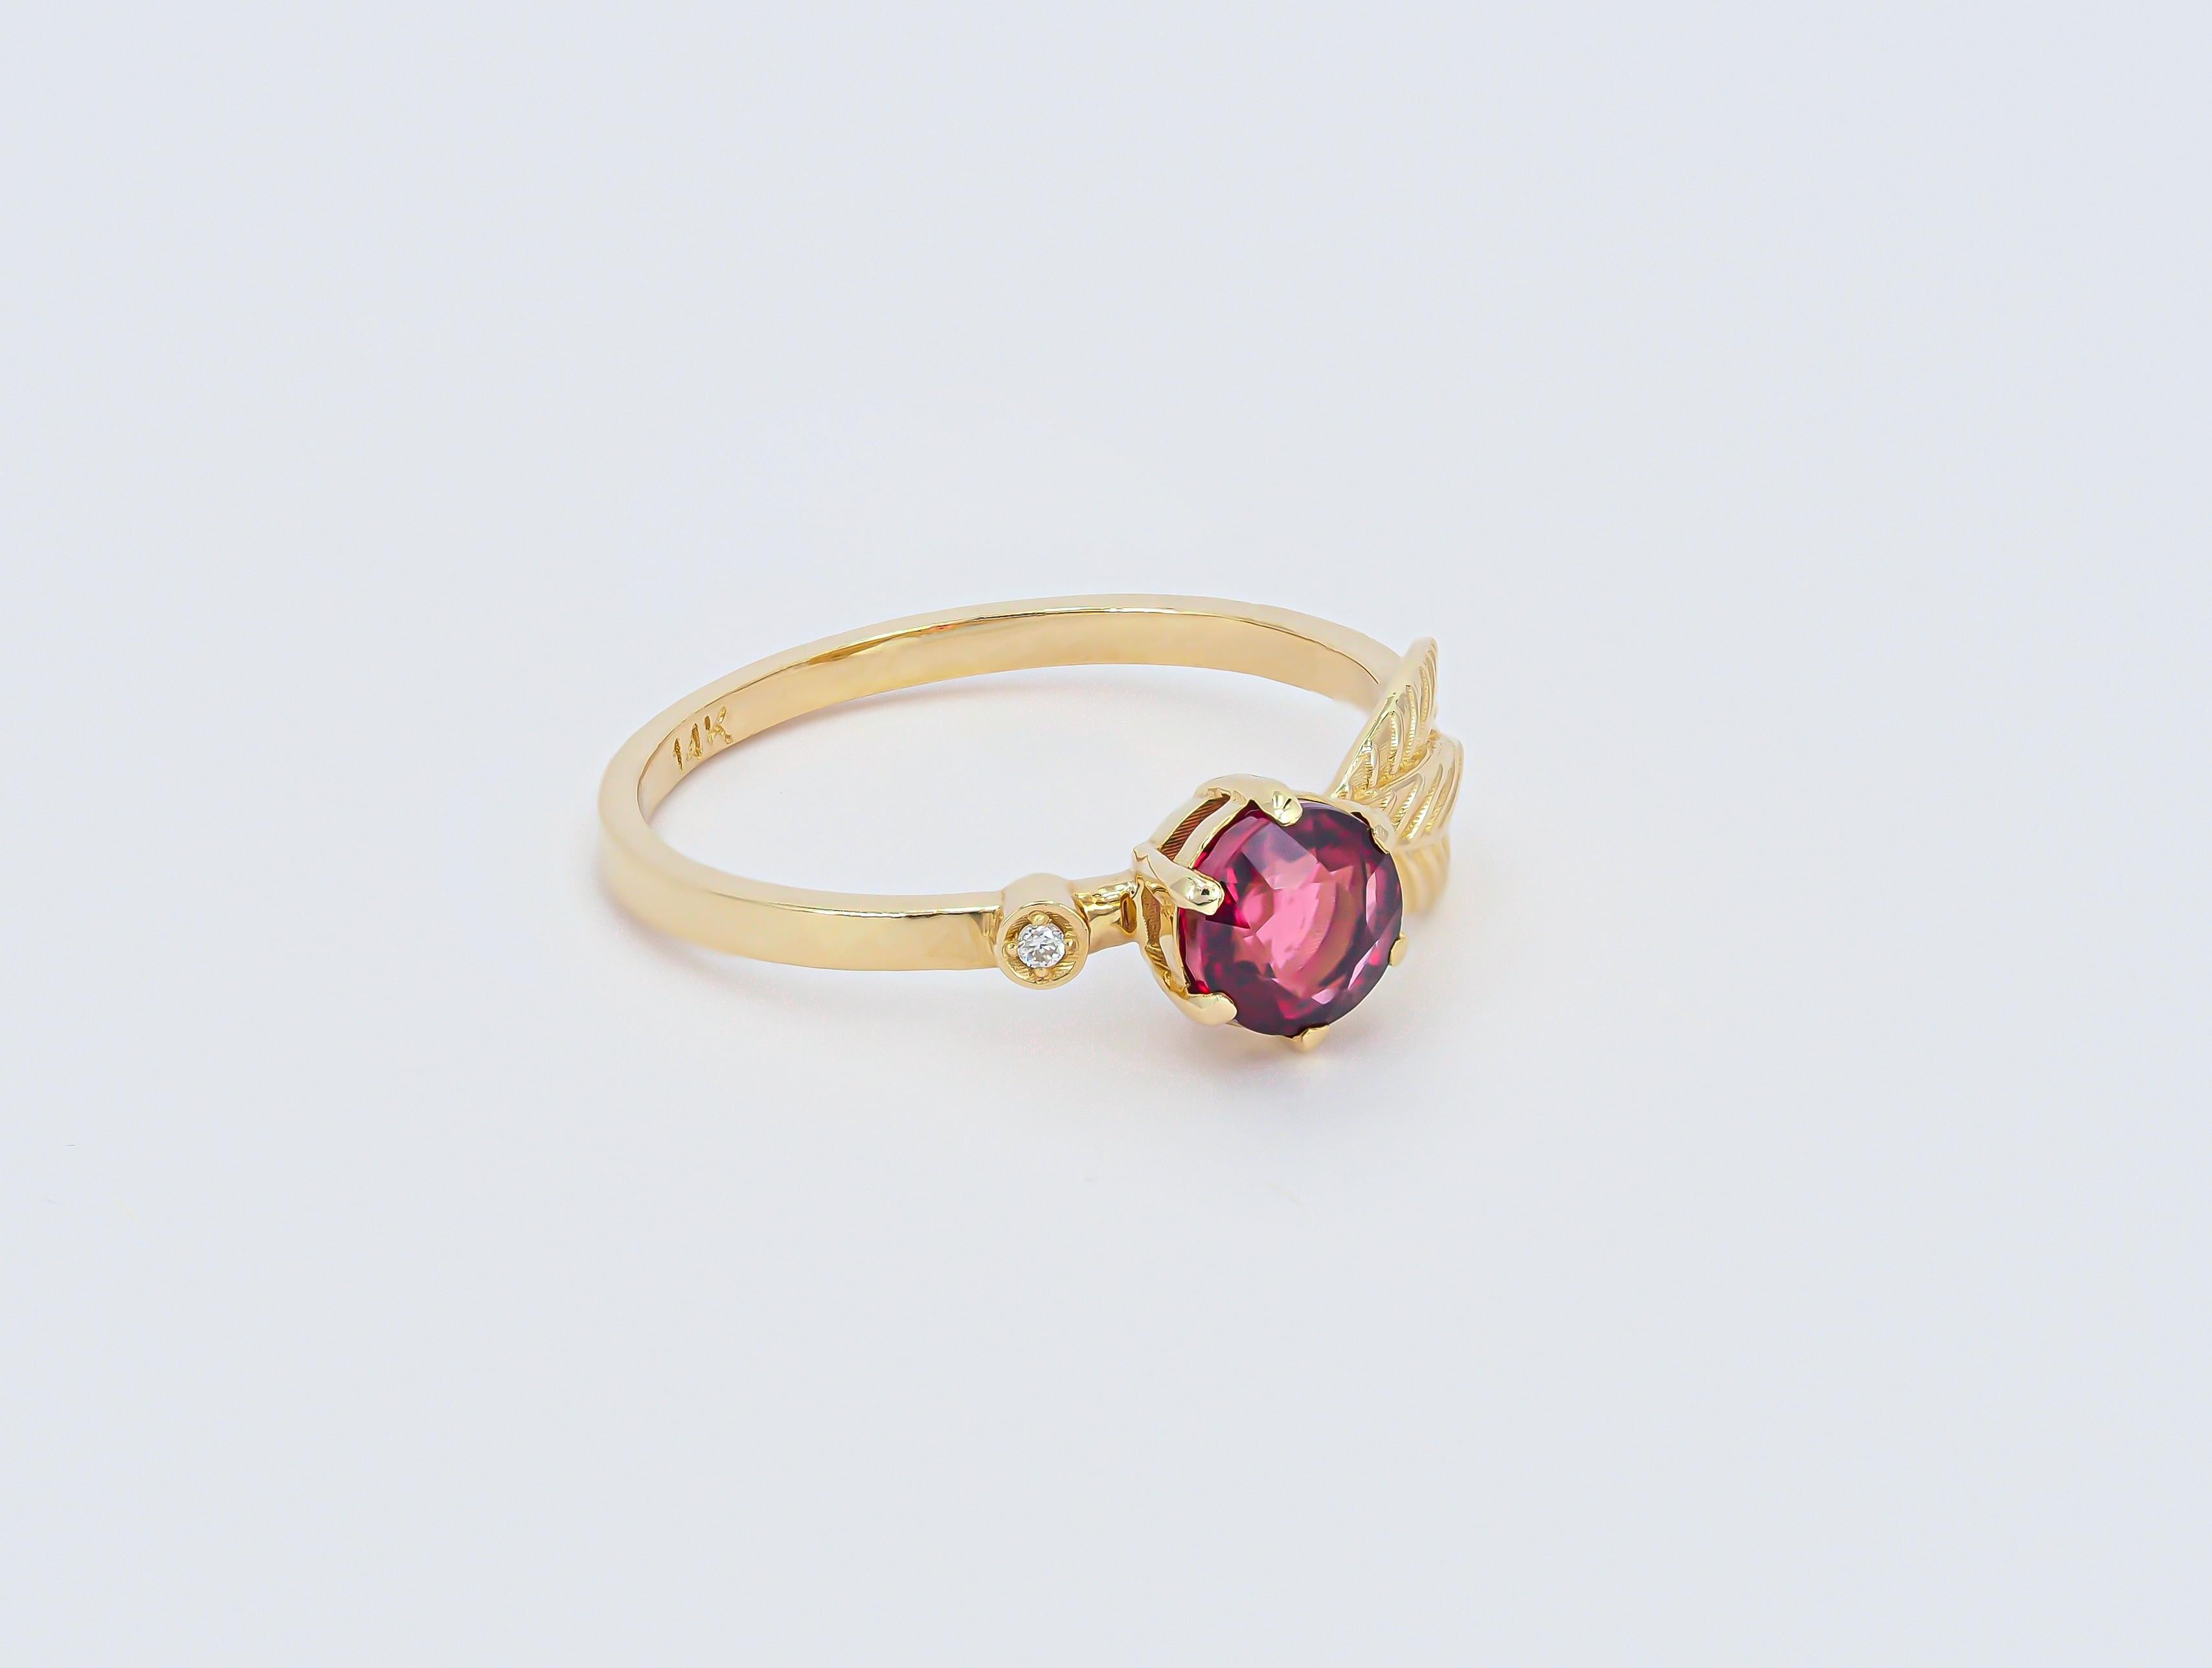 For Sale:  14k Gold Ring with Garnet and Diamonds 3